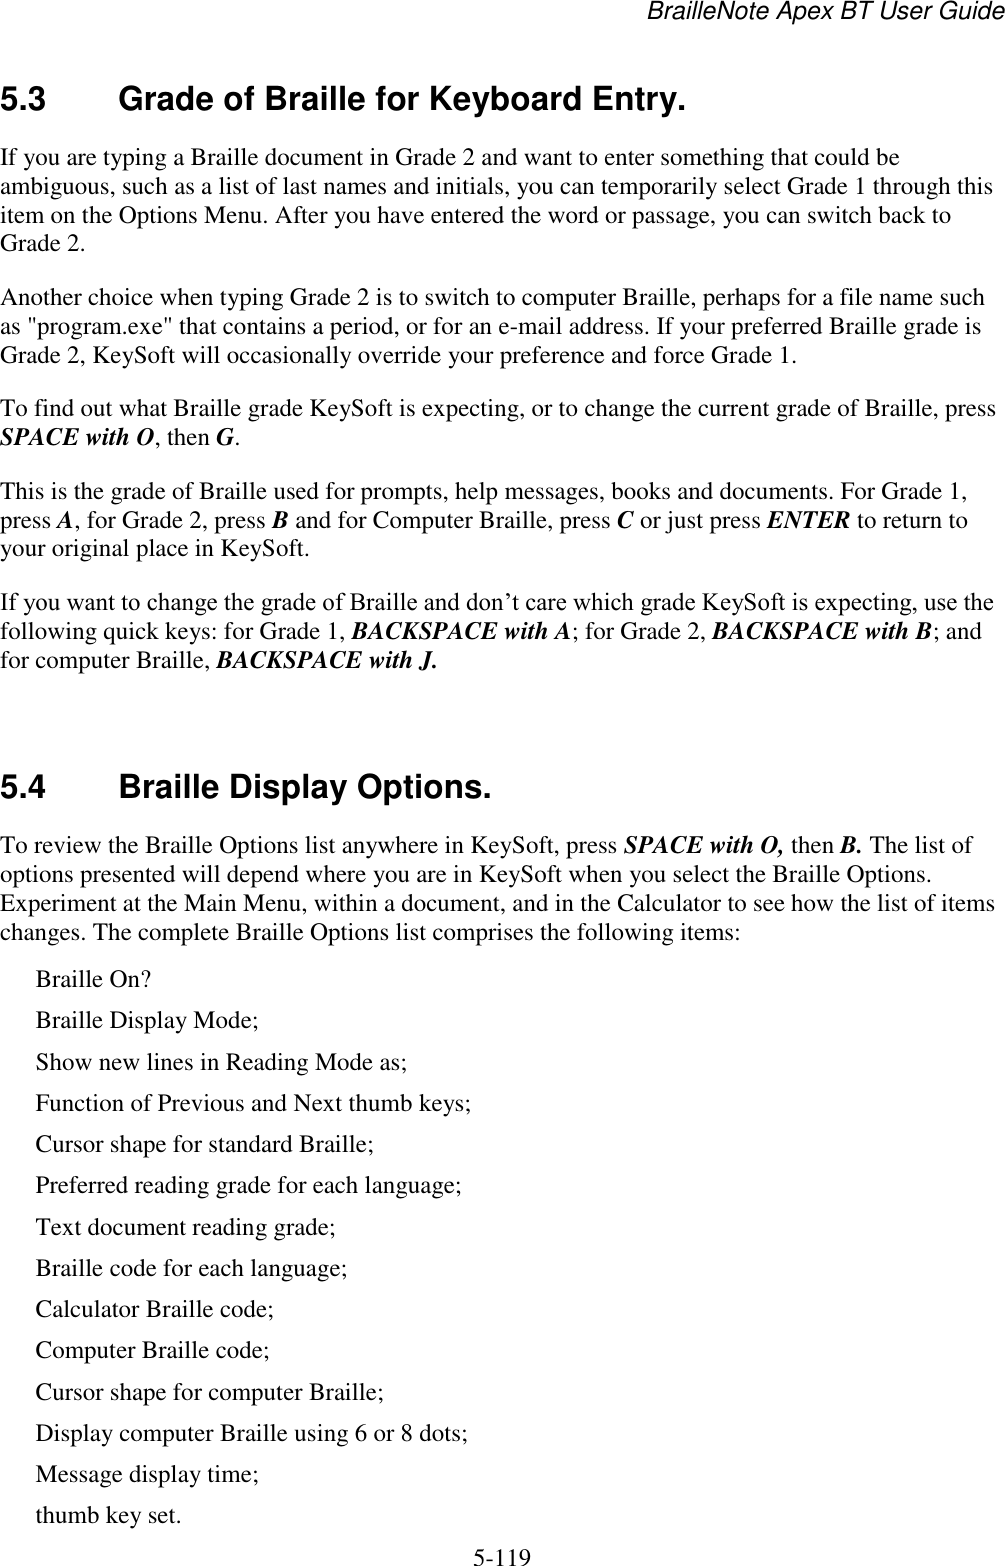 BrailleNote Apex BT User Guide   5-119   5.3  Grade of Braille for Keyboard Entry. If you are typing a Braille document in Grade 2 and want to enter something that could be ambiguous, such as a list of last names and initials, you can temporarily select Grade 1 through this item on the Options Menu. After you have entered the word or passage, you can switch back to Grade 2. Another choice when typing Grade 2 is to switch to computer Braille, perhaps for a file name such as &quot;program.exe&quot; that contains a period, or for an e-mail address. If your preferred Braille grade is Grade 2, KeySoft will occasionally override your preference and force Grade 1. To find out what Braille grade KeySoft is expecting, or to change the current grade of Braille, press SPACE with O, then G. This is the grade of Braille used for prompts, help messages, books and documents. For Grade 1, press A, for Grade 2, press B and for Computer Braille, press C or just press ENTER to return to your original place in KeySoft. If you want to change the grade of Braille and don‟t care which grade KeySoft is expecting, use the following quick keys: for Grade 1, BACKSPACE with A; for Grade 2, BACKSPACE with B; and for computer Braille, BACKSPACE with J.   5.4  Braille Display Options. To review the Braille Options list anywhere in KeySoft, press SPACE with O, then B. The list of options presented will depend where you are in KeySoft when you select the Braille Options. Experiment at the Main Menu, within a document, and in the Calculator to see how the list of items changes. The complete Braille Options list comprises the following items: Braille On? Braille Display Mode; Show new lines in Reading Mode as; Function of Previous and Next thumb keys; Cursor shape for standard Braille; Preferred reading grade for each language; Text document reading grade; Braille code for each language; Calculator Braille code; Computer Braille code; Cursor shape for computer Braille; Display computer Braille using 6 or 8 dots; Message display time; thumb key set. 